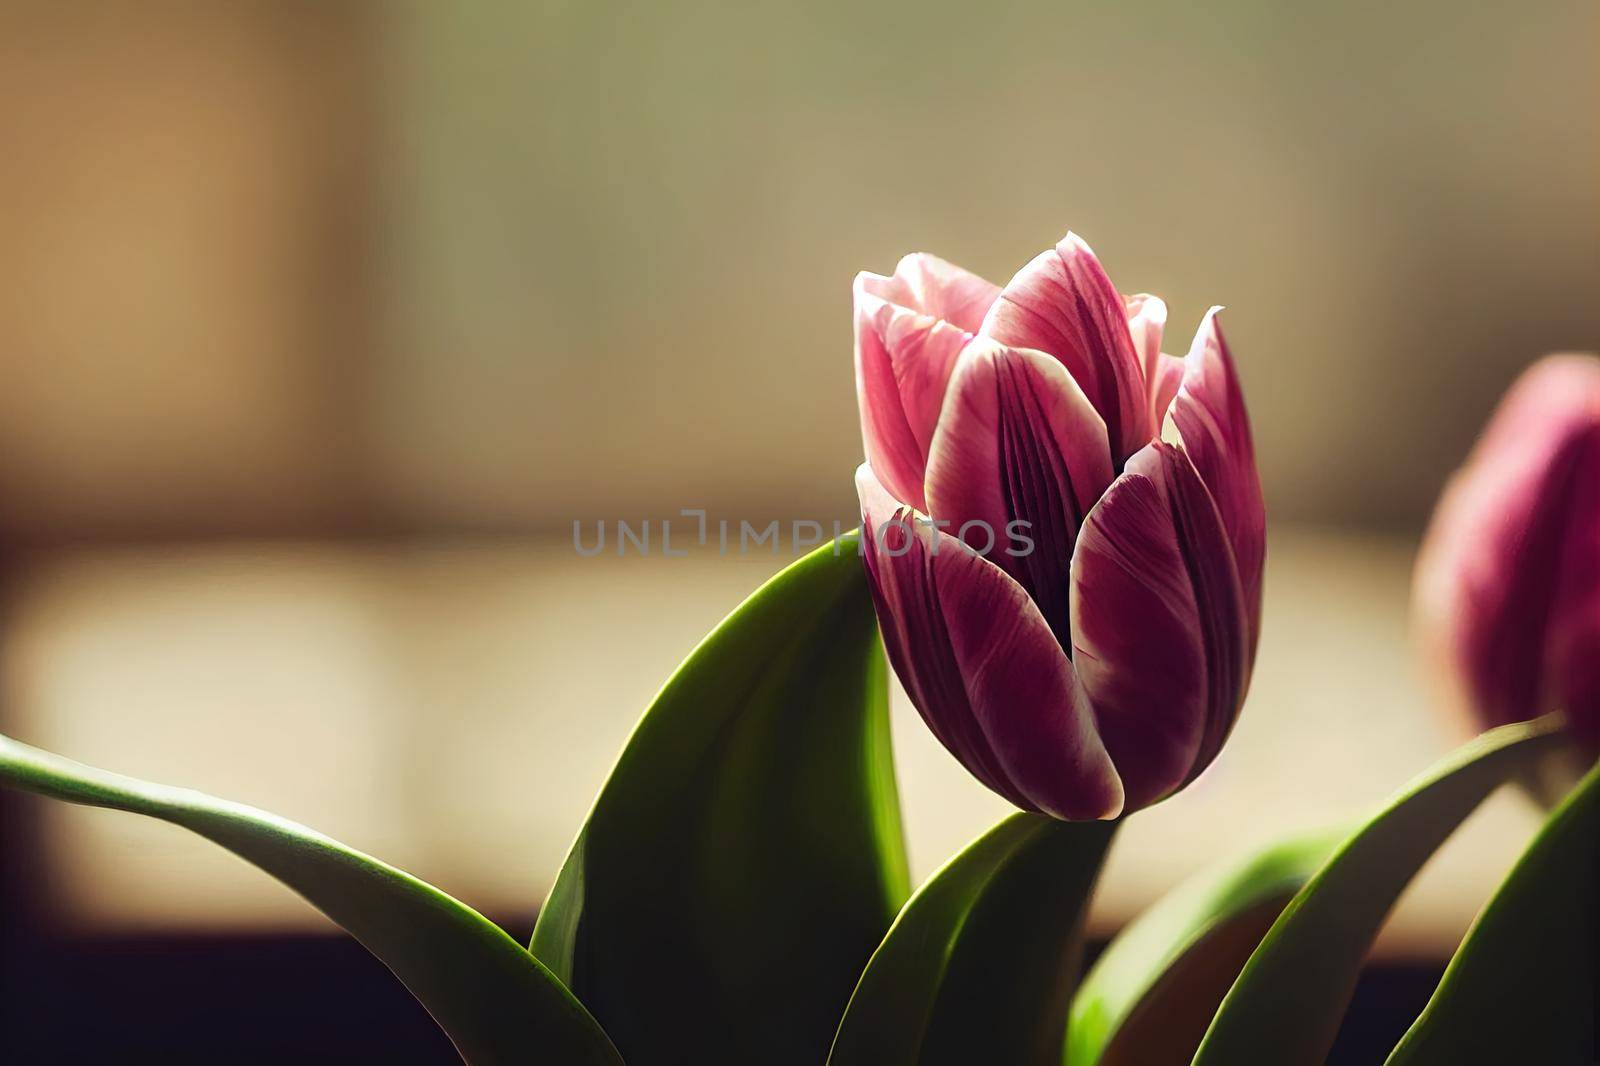 Top View Growing Big Bud Tulip Flower and Dew Petals. Amazing Beautiful Blooming Plant in Timelapse. Lovely Romantic and Natural Backdrop Wedding Decoration Alone Flower in Growing Process Closeup 4k